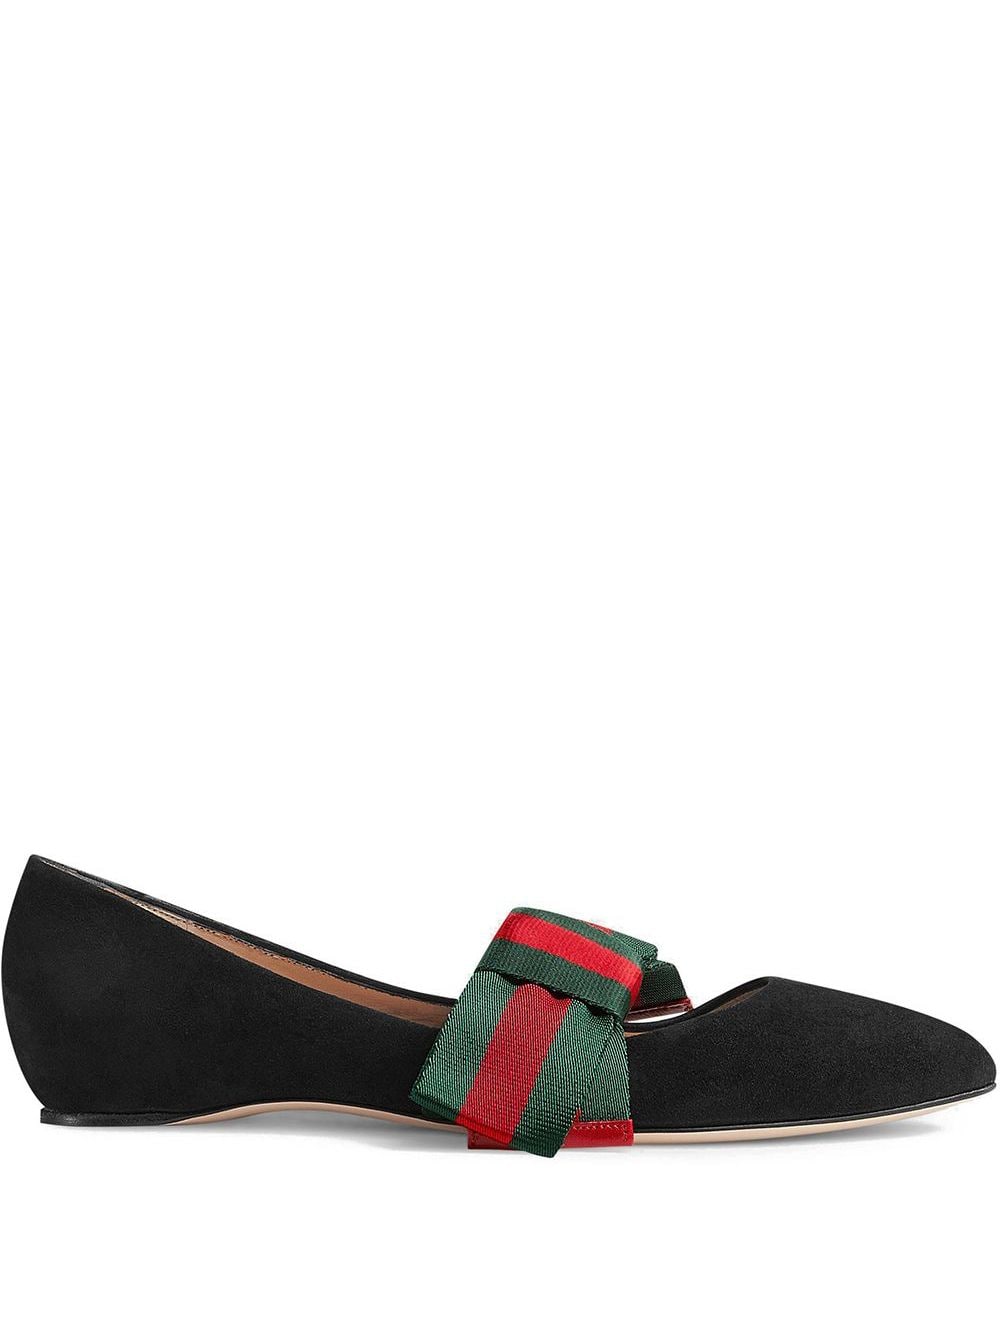 Gucci Suede Ballet Flats with Web Bow 